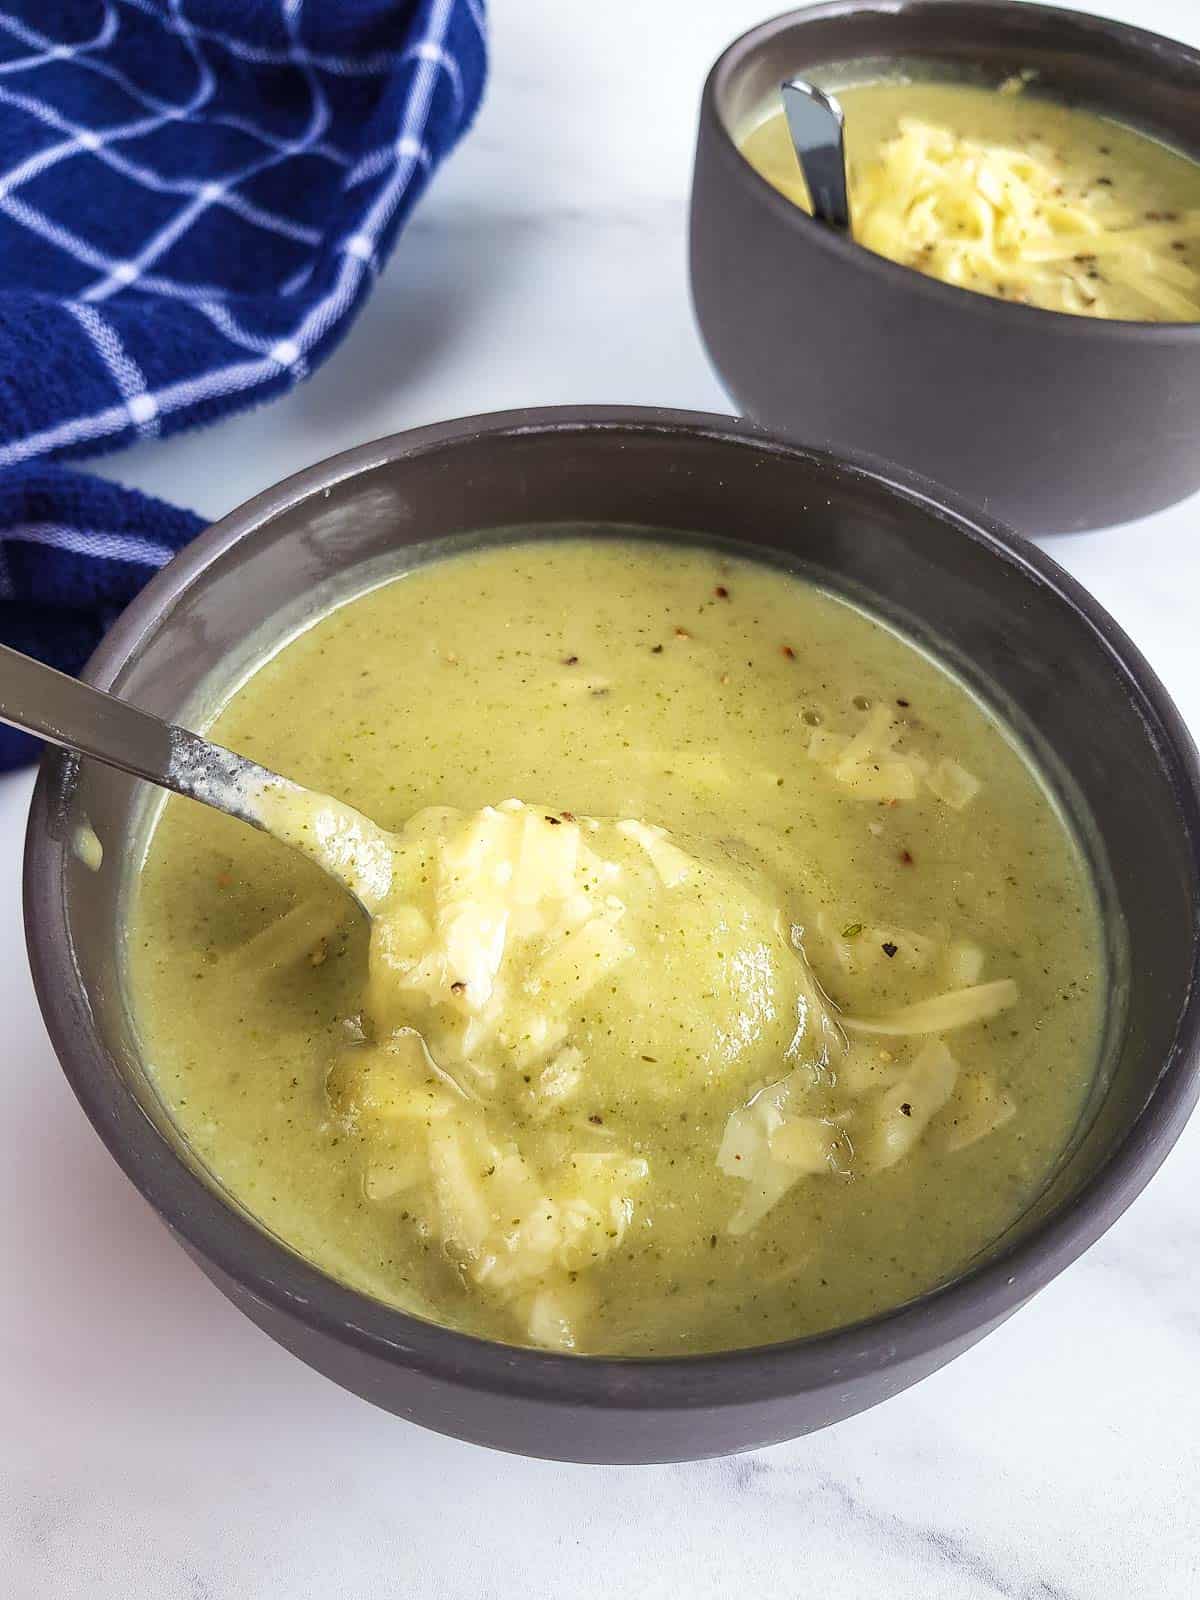 A bowl of broccoli cauliflower soup, with a spoon stirring it.